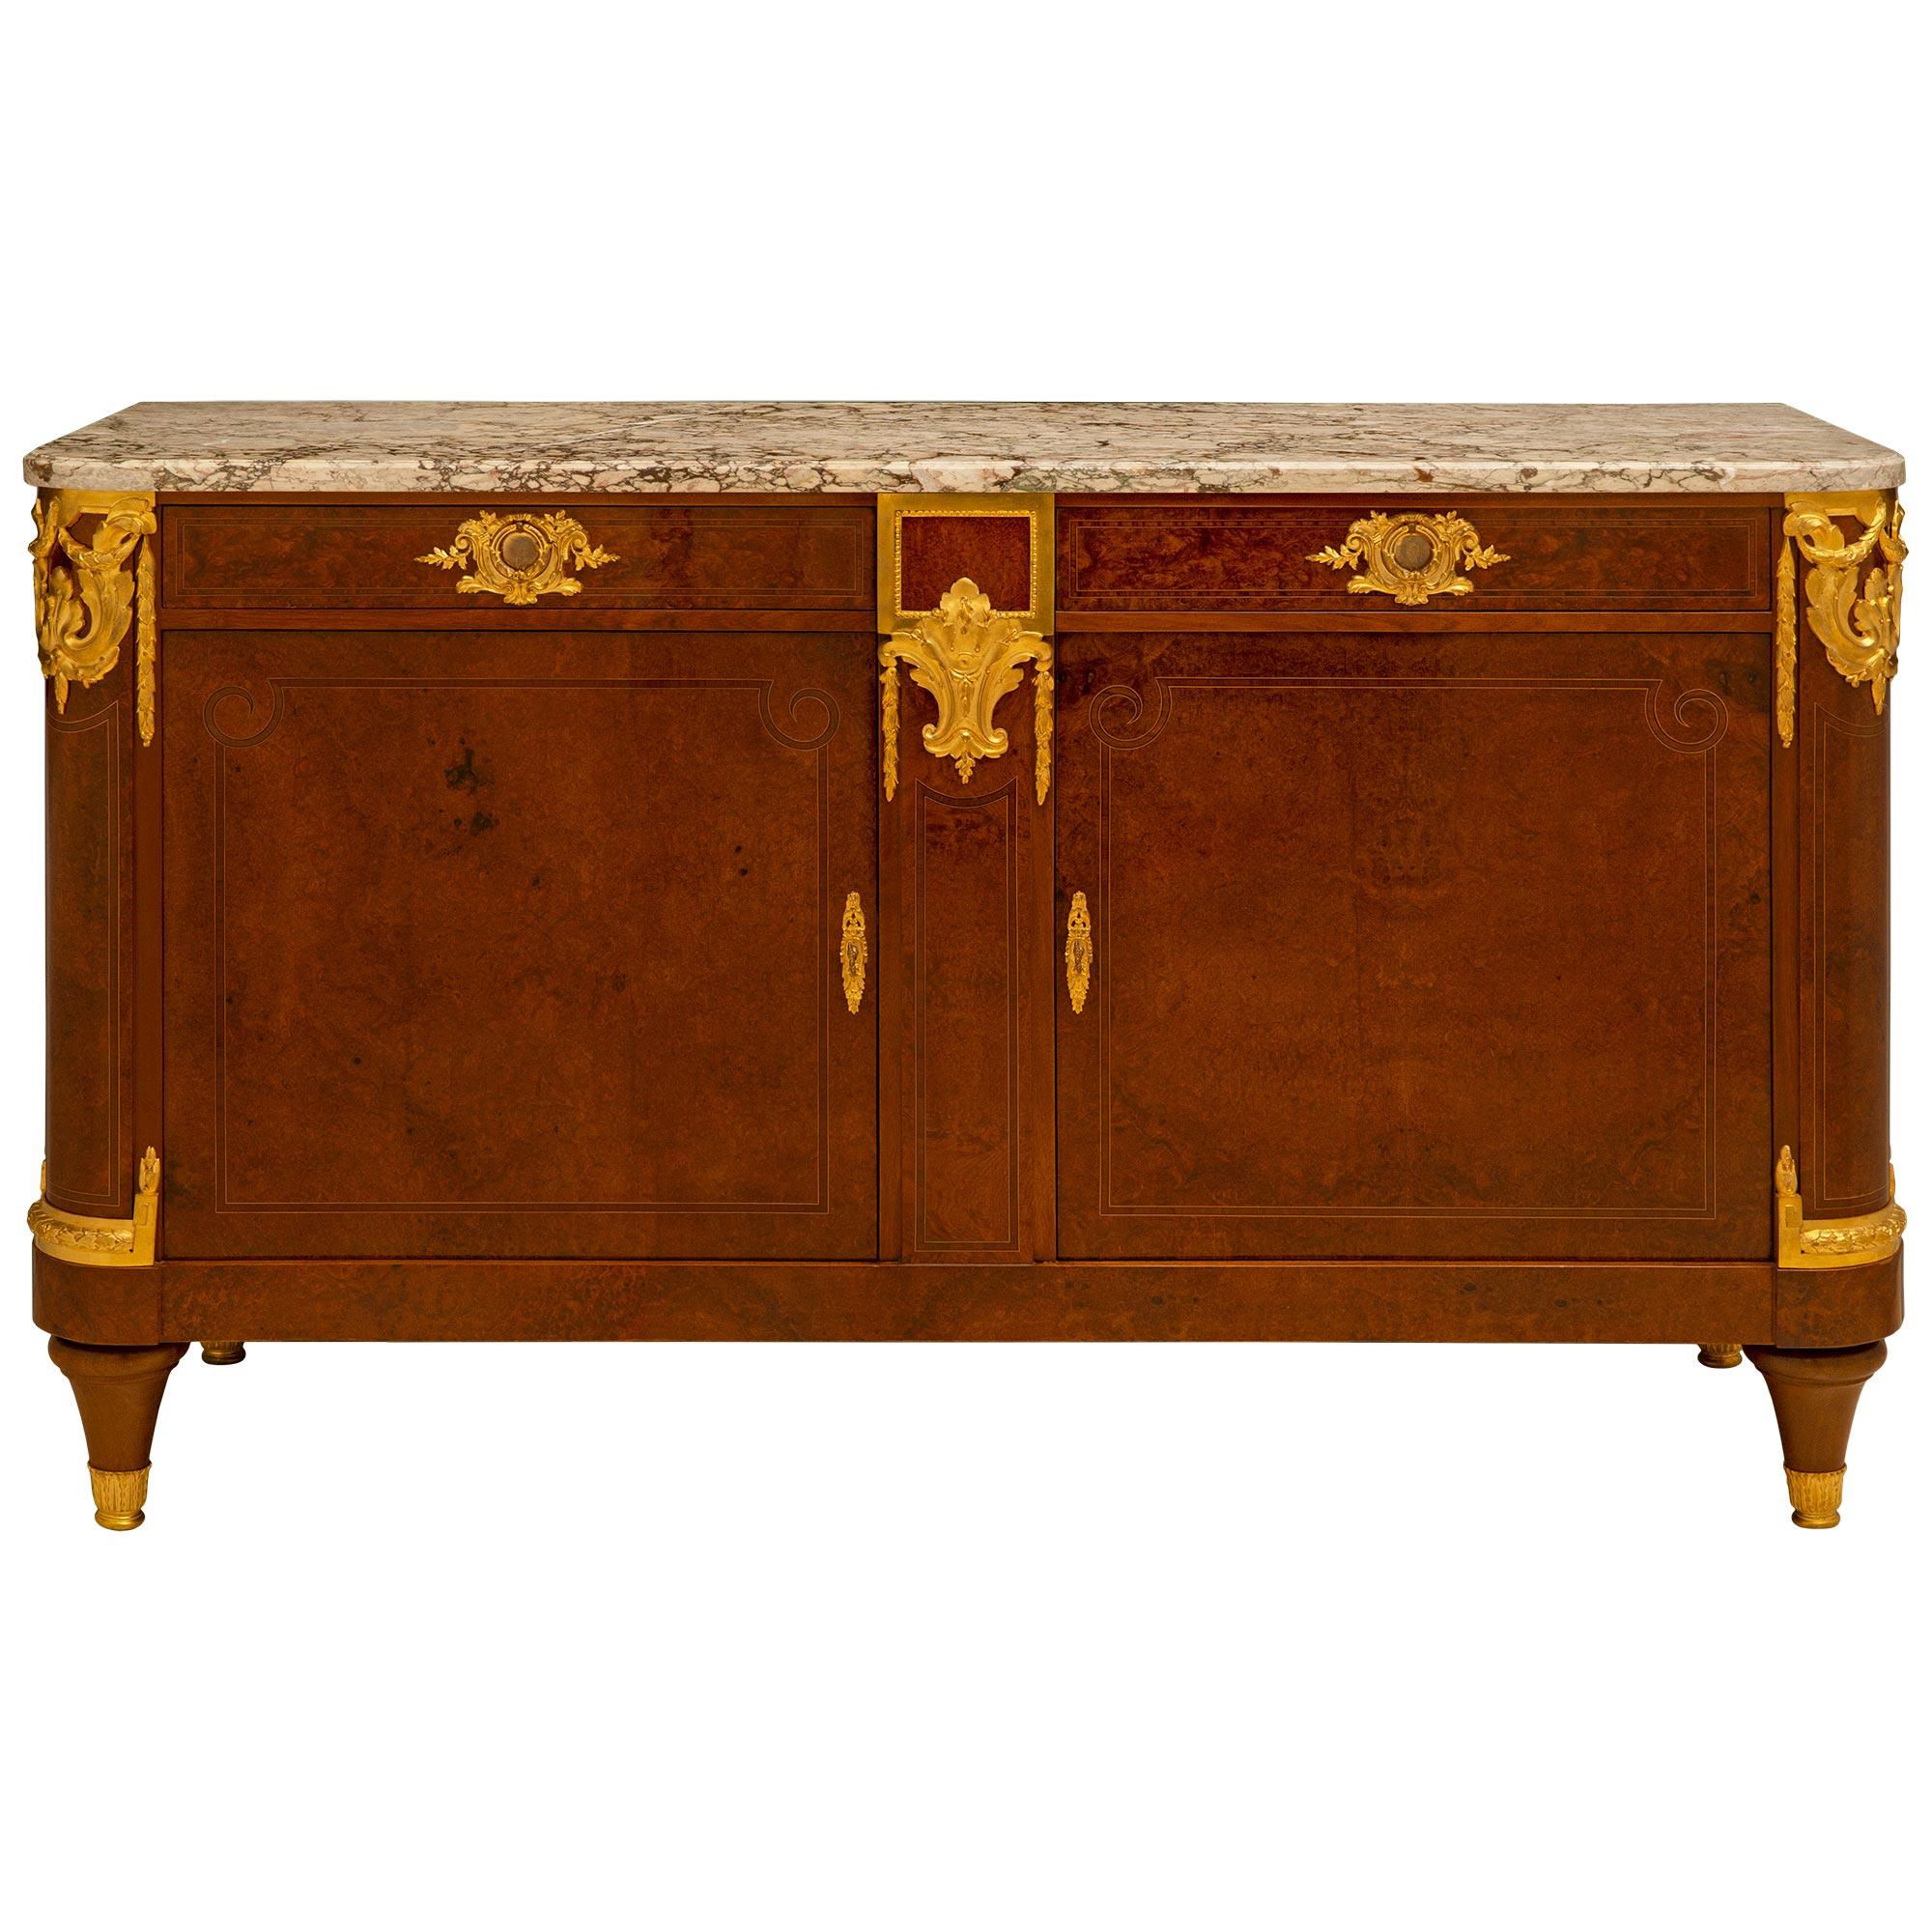 French 19th Century Empire Neoclassical Style Burl Walnut and Ormolu Buffet For Sale 8